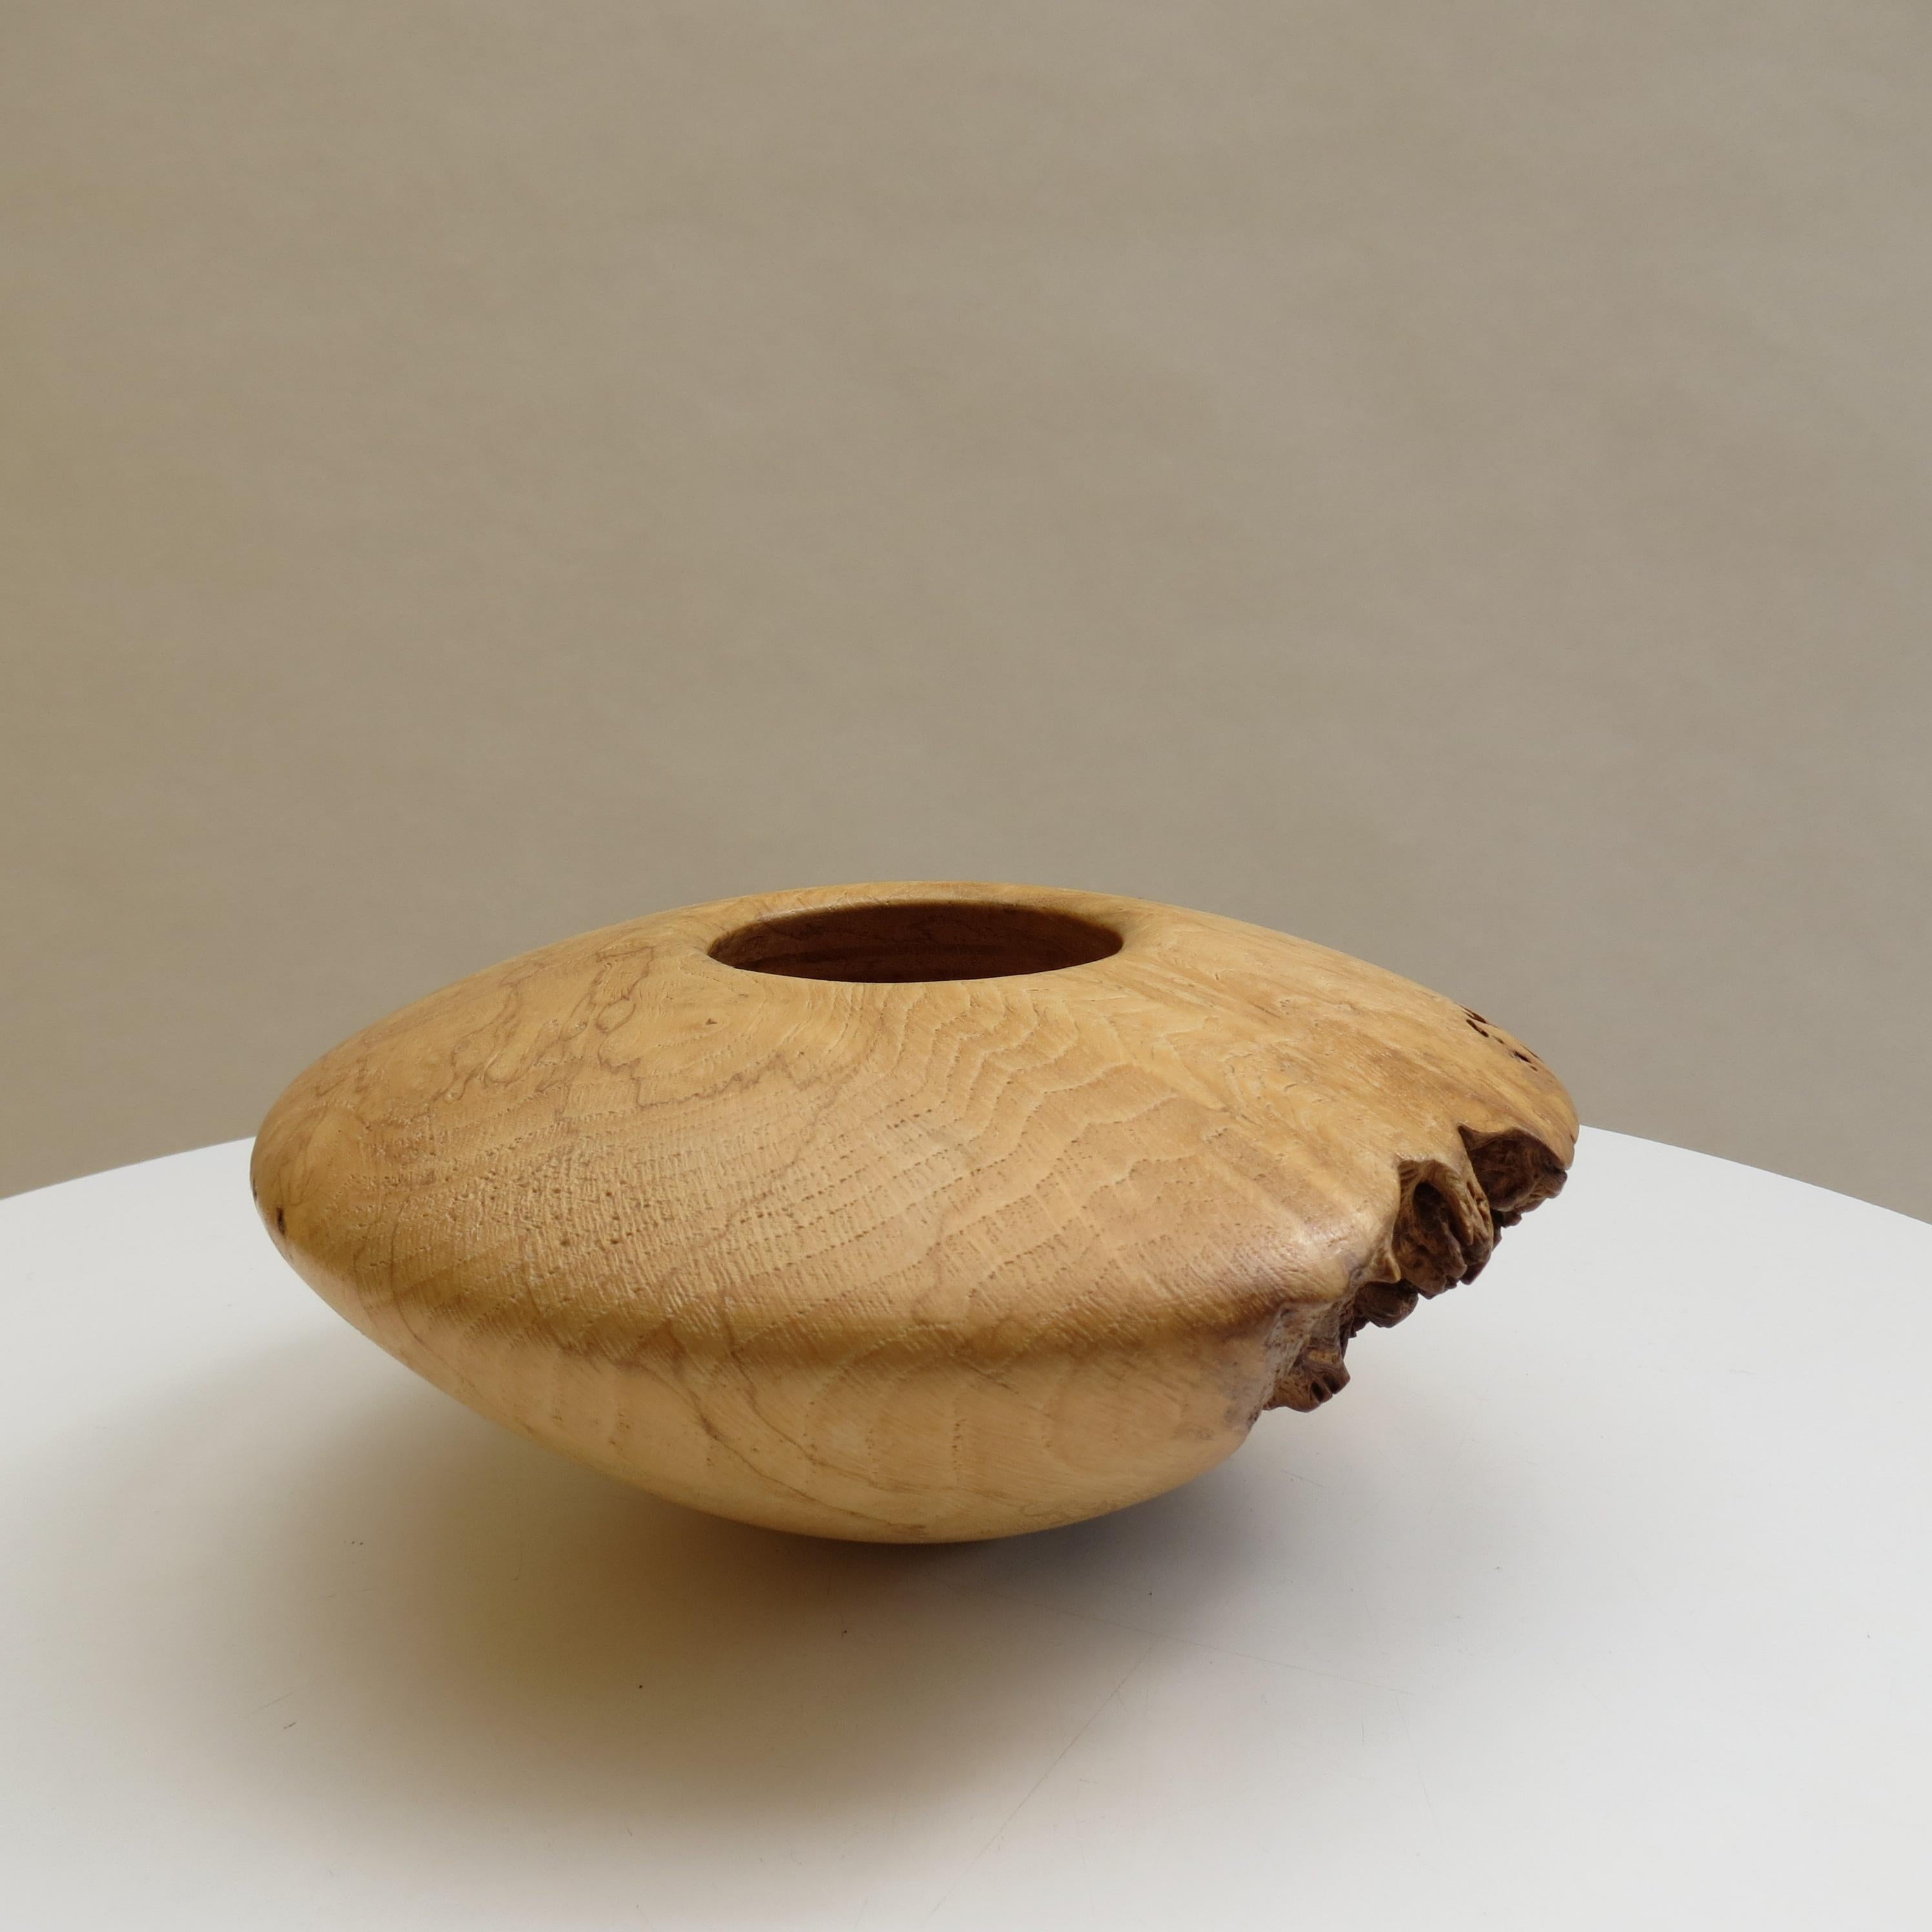 A very elegant vintage wooden sculptural pot made from burr oak, with some contrasting areas of natural burr. Wonderful shape with small circular opening to the top, hand-turned rings to the interior of the pot. Hand produced by Mike Scott